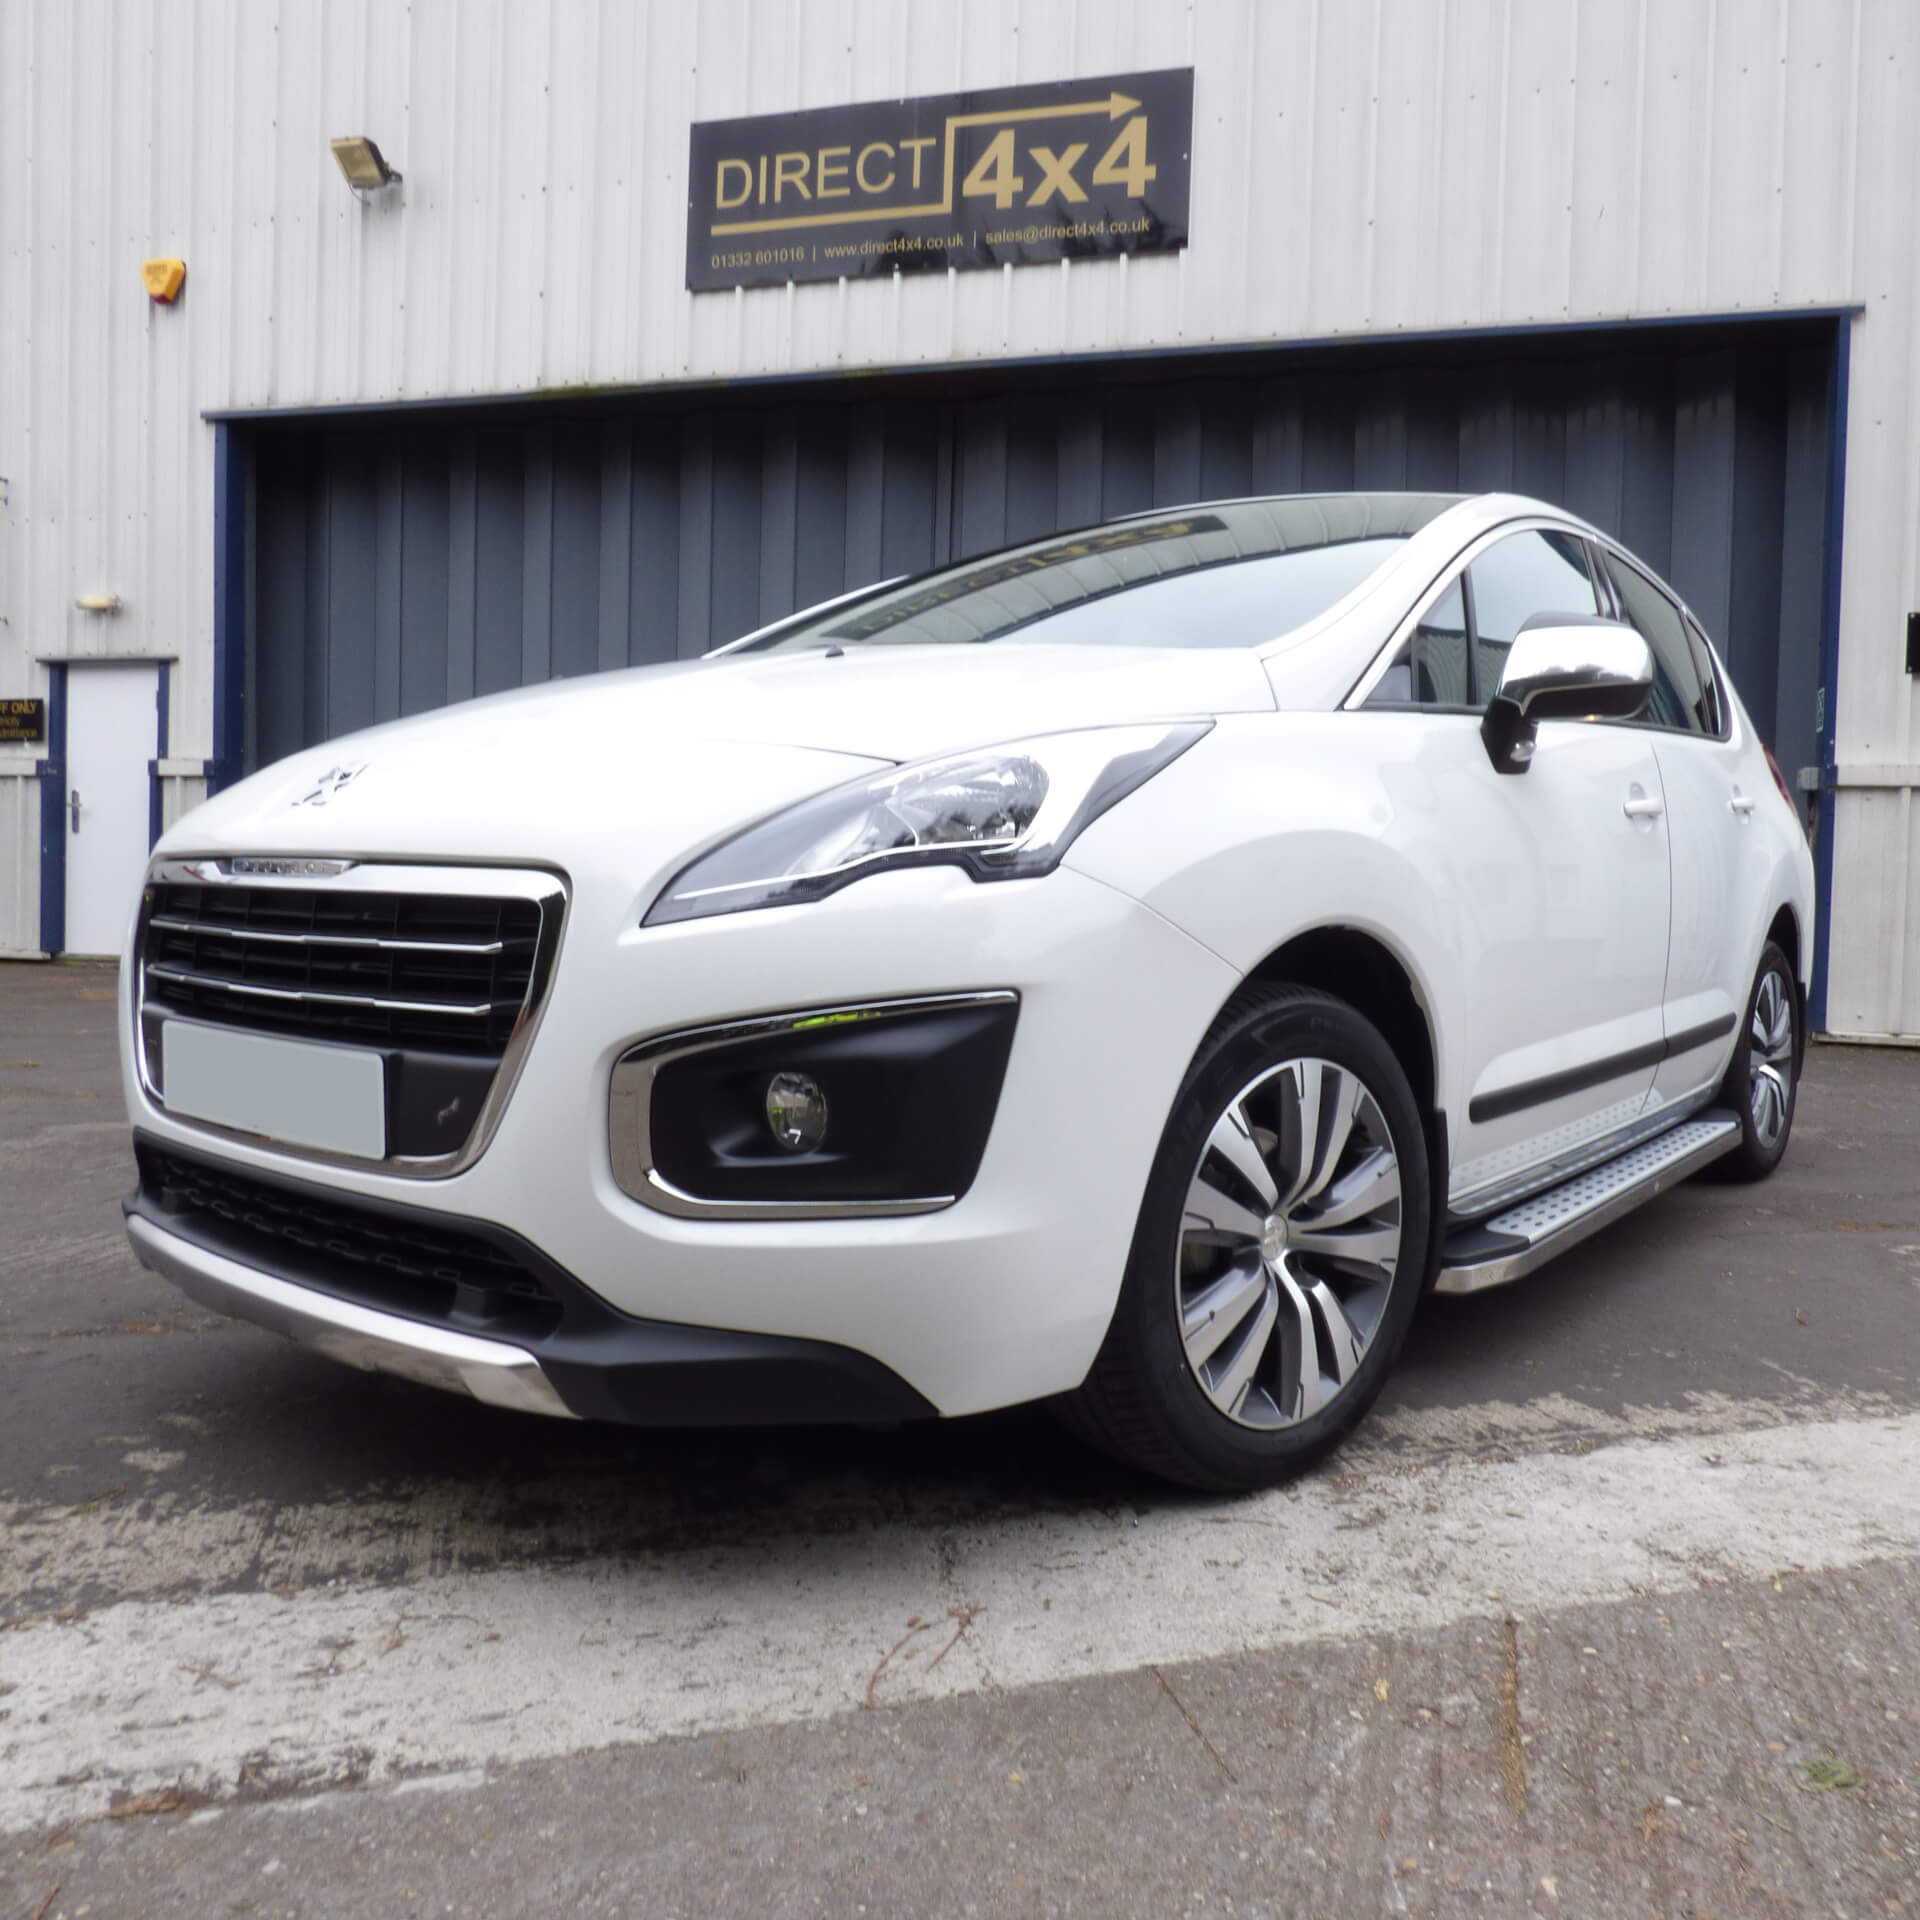 Direct4x4 accessories for Peugeot 3008 vehicles with a photo of a white Peugeot 3008 parked outside our depot fitted with Freedom style side steps 